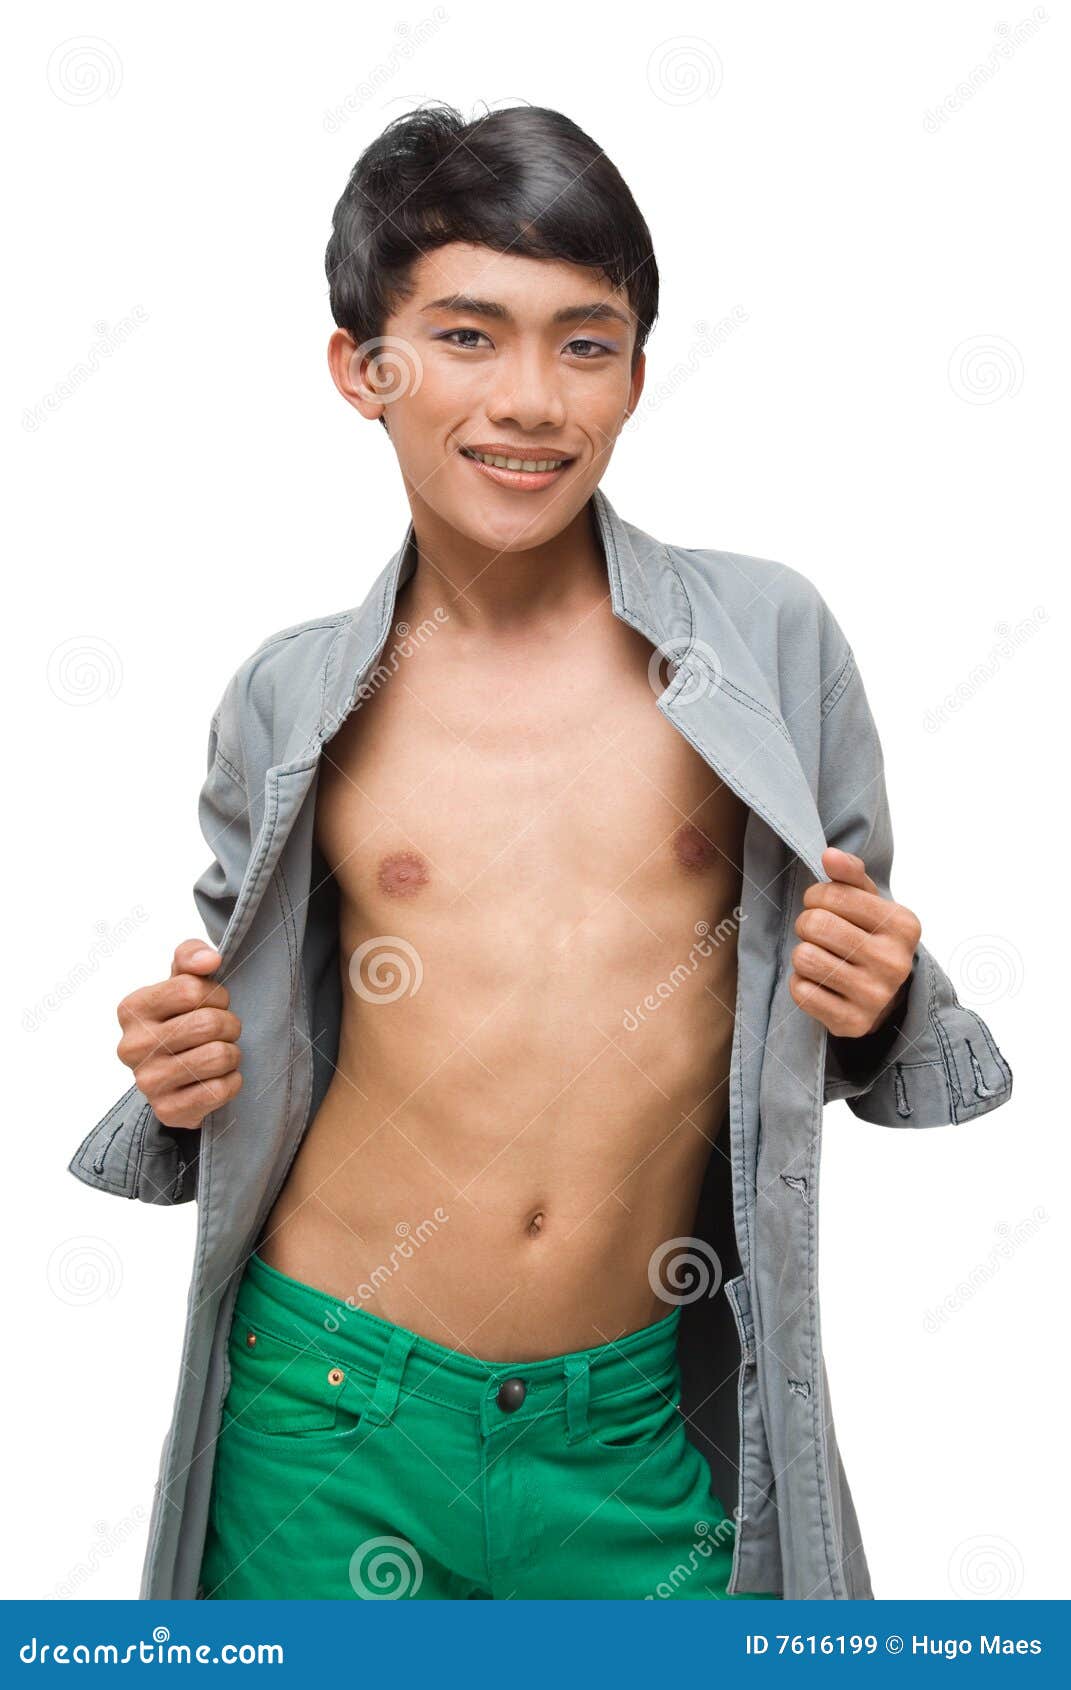 Very young asian boys models